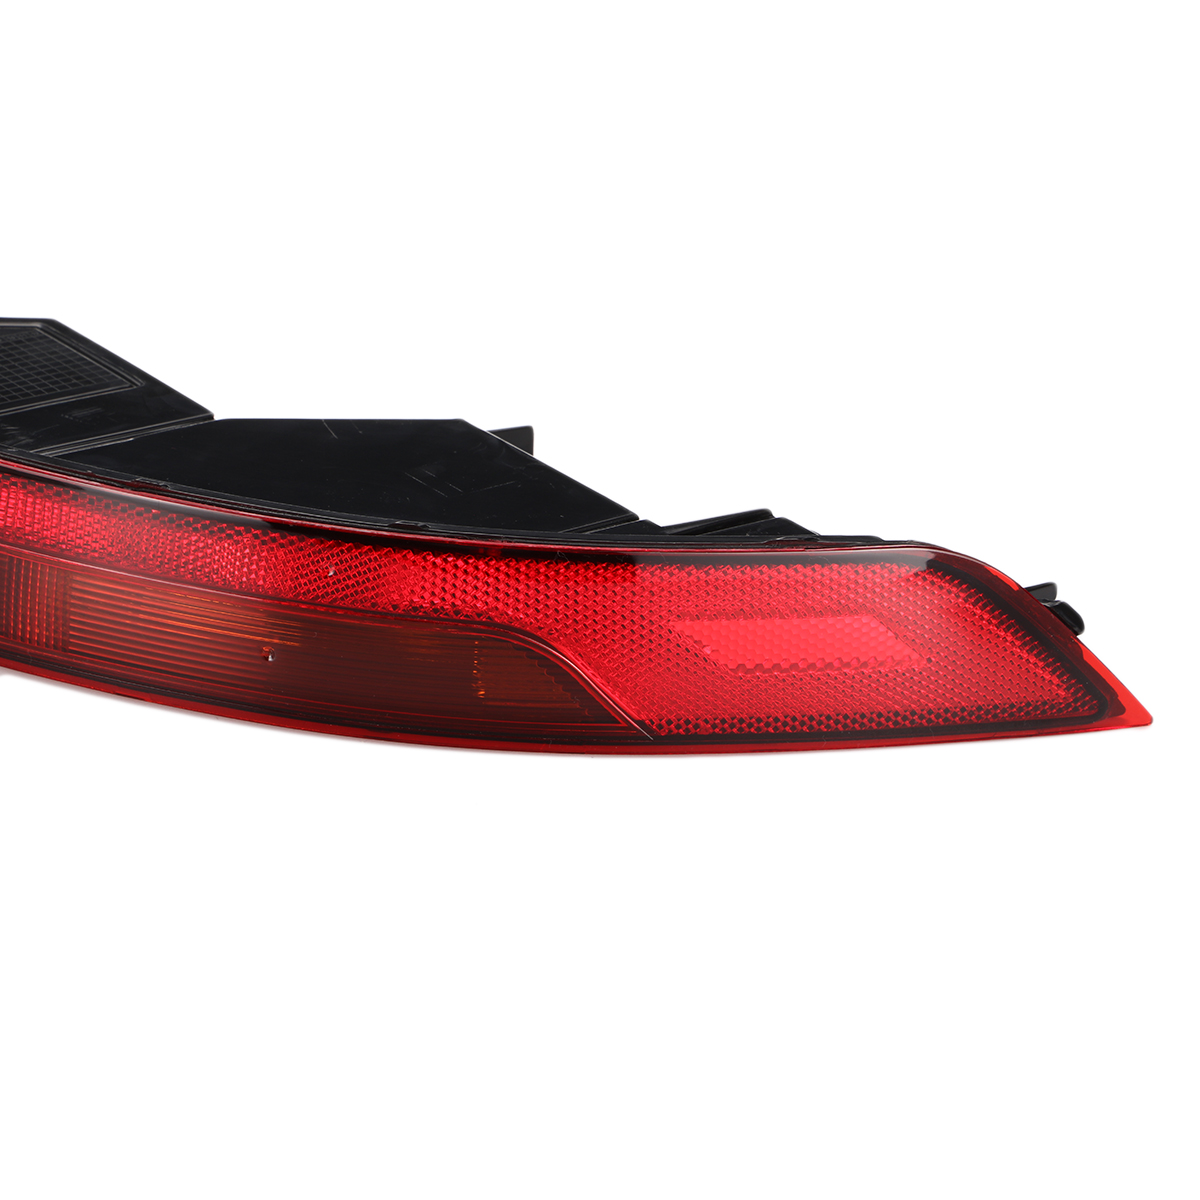 Find For AUDI Q5 2018 2021 RH Right Side Rear Bumper Reflector Fog Brake Lights for Sale on Gipsybee.com with cryptocurrencies